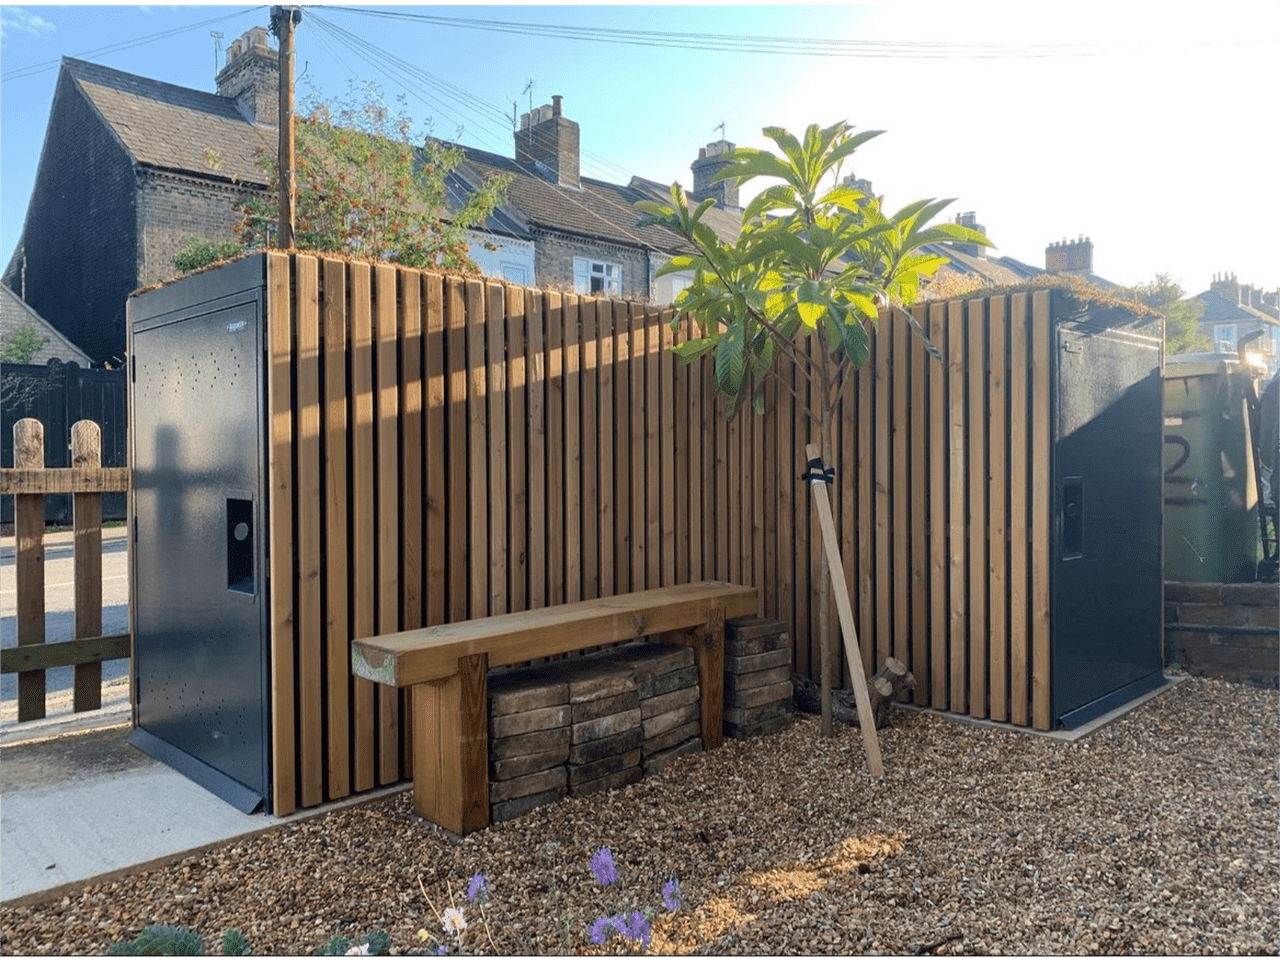 Urban bike shed with rooftop garden